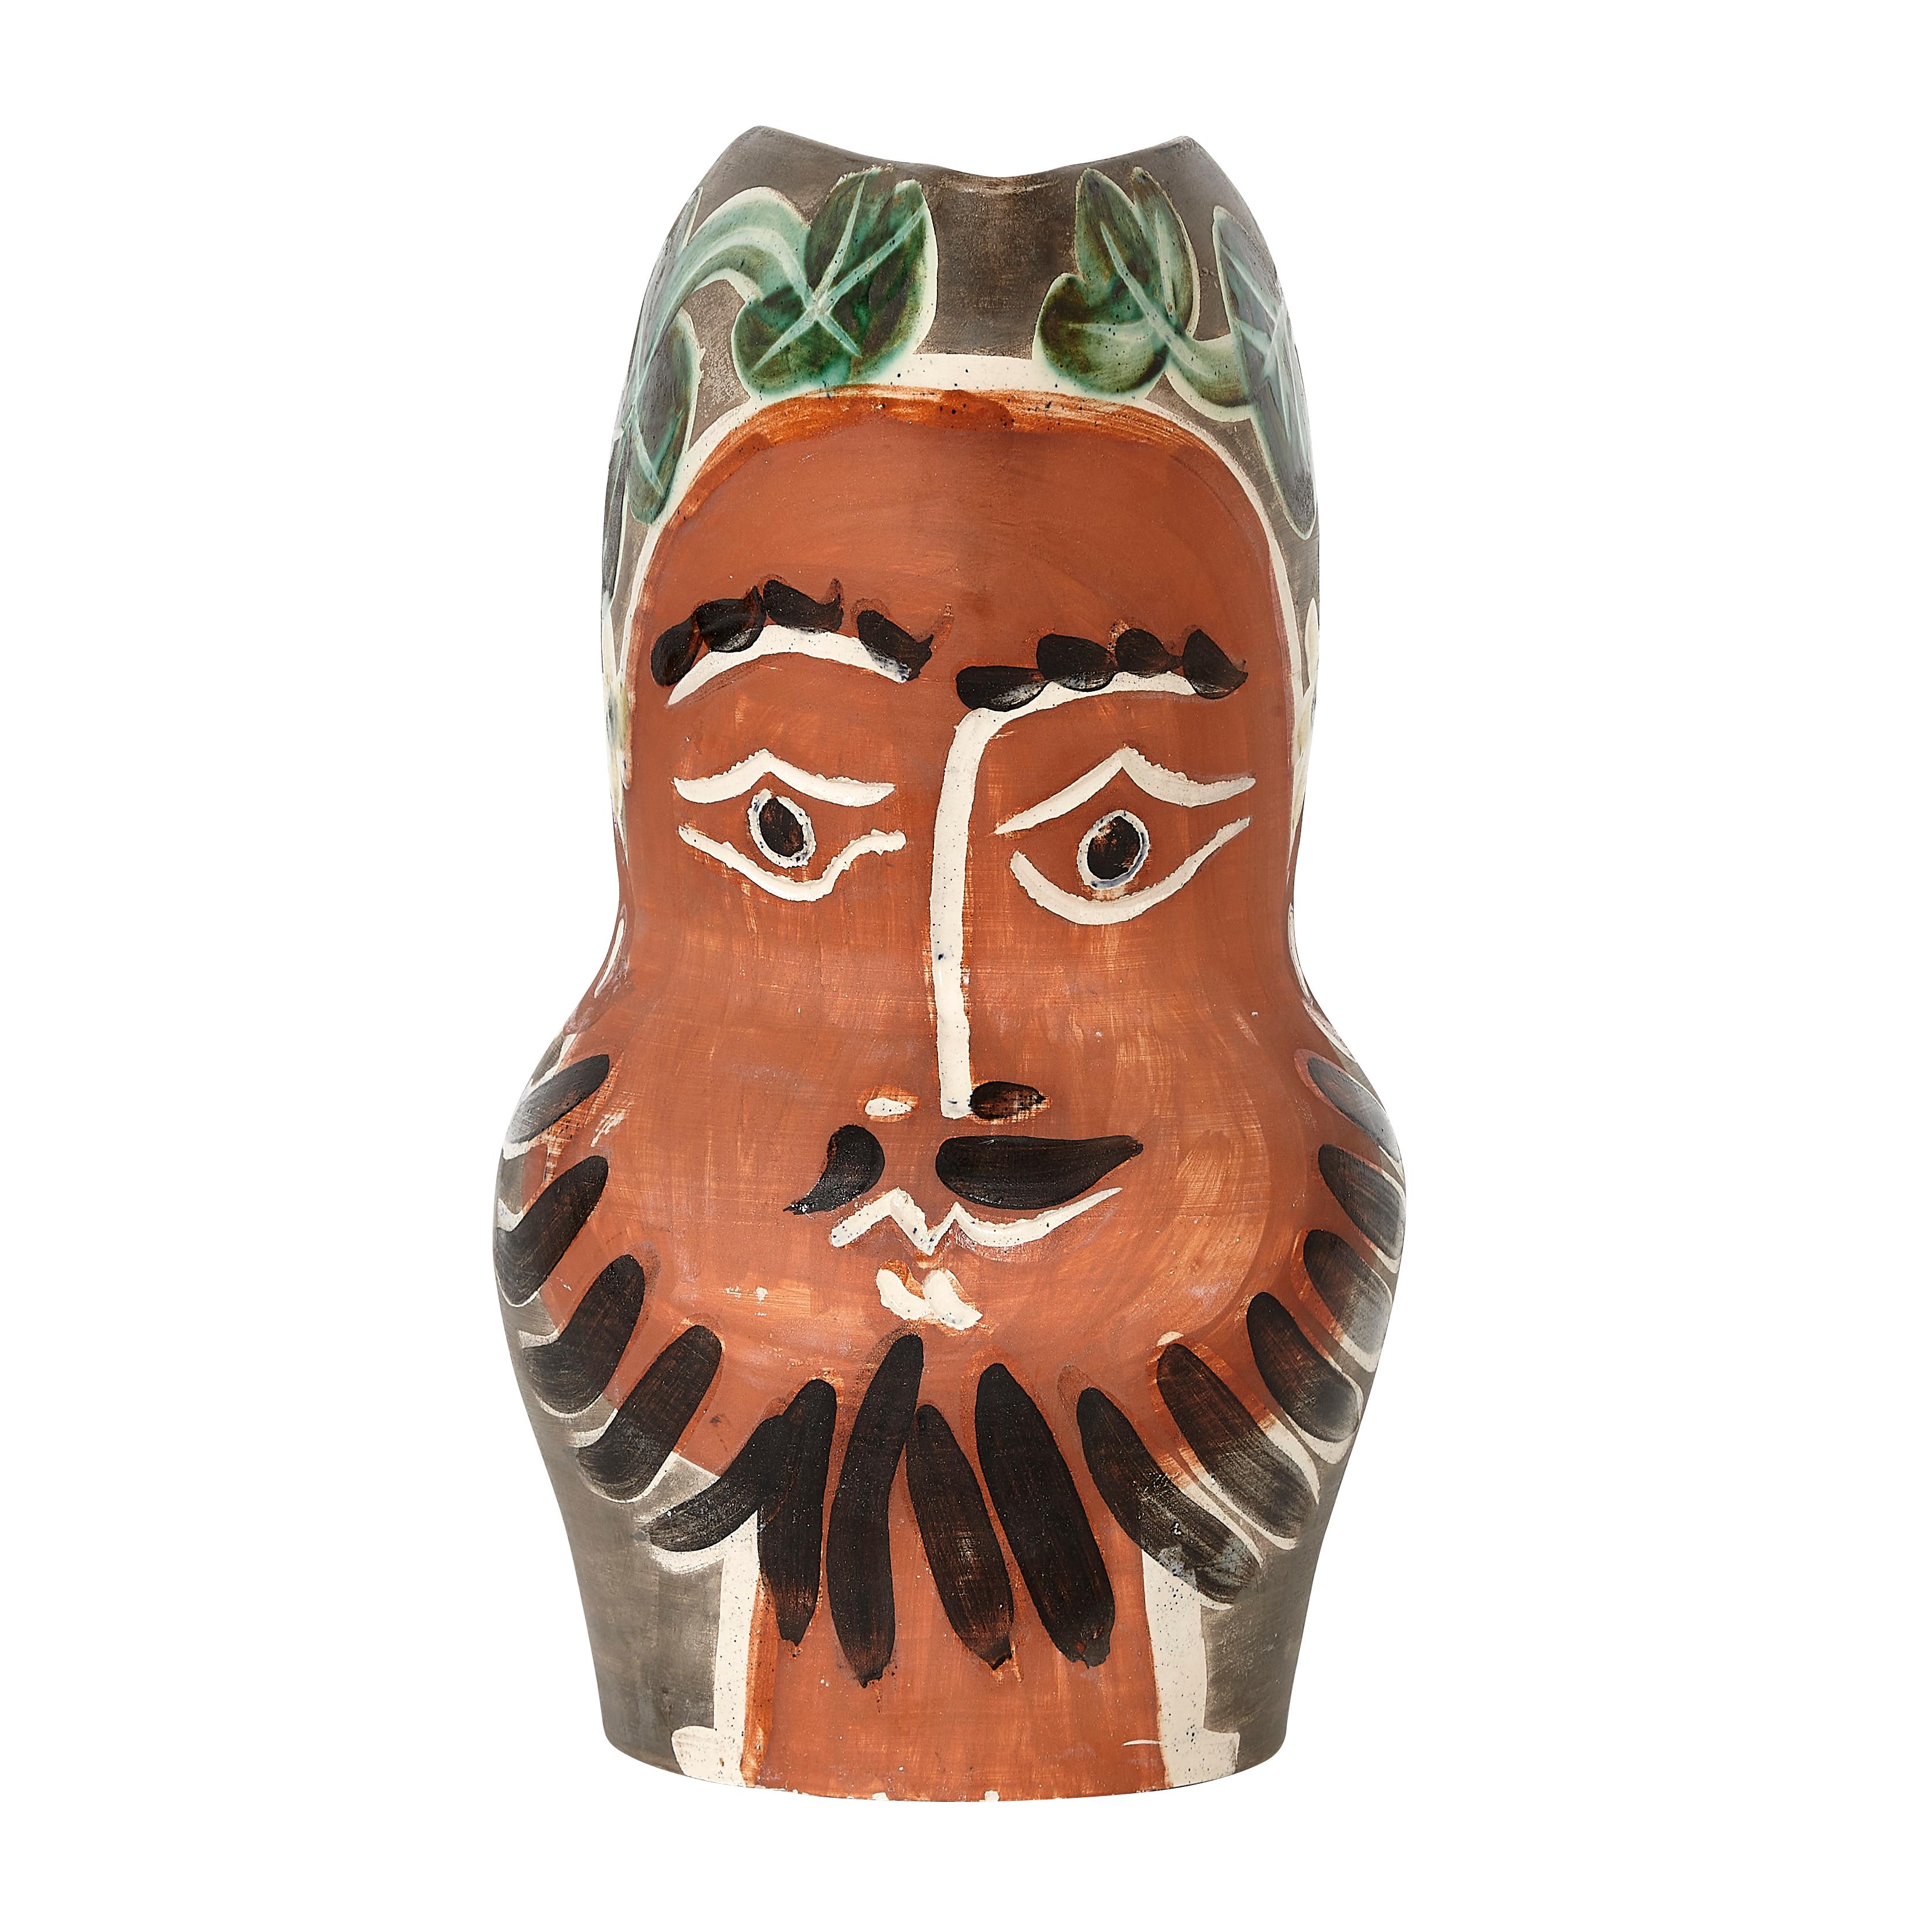 Pablo Picasso 'Le barbu' (A. R. 217) Bearded Man Pitcher For Sale 1